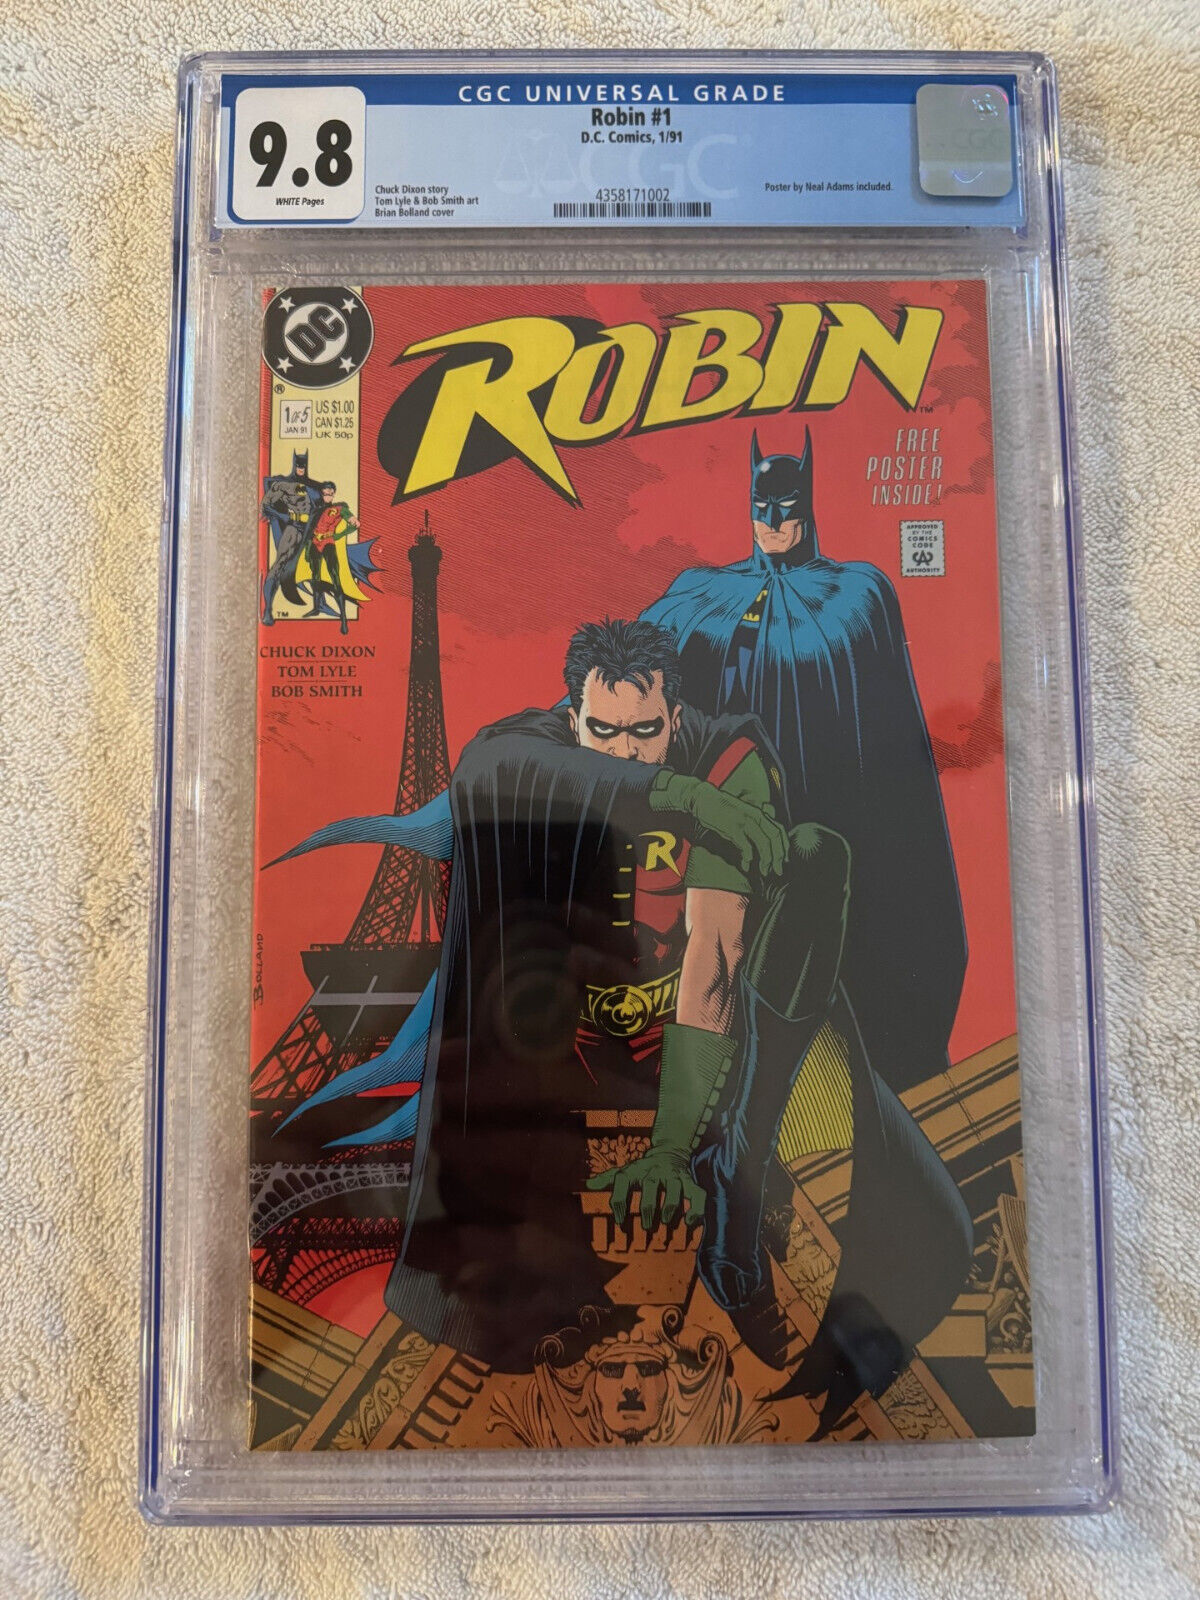 Robin #1 - CGC 9.8 - White Pages - DC Comics 1991